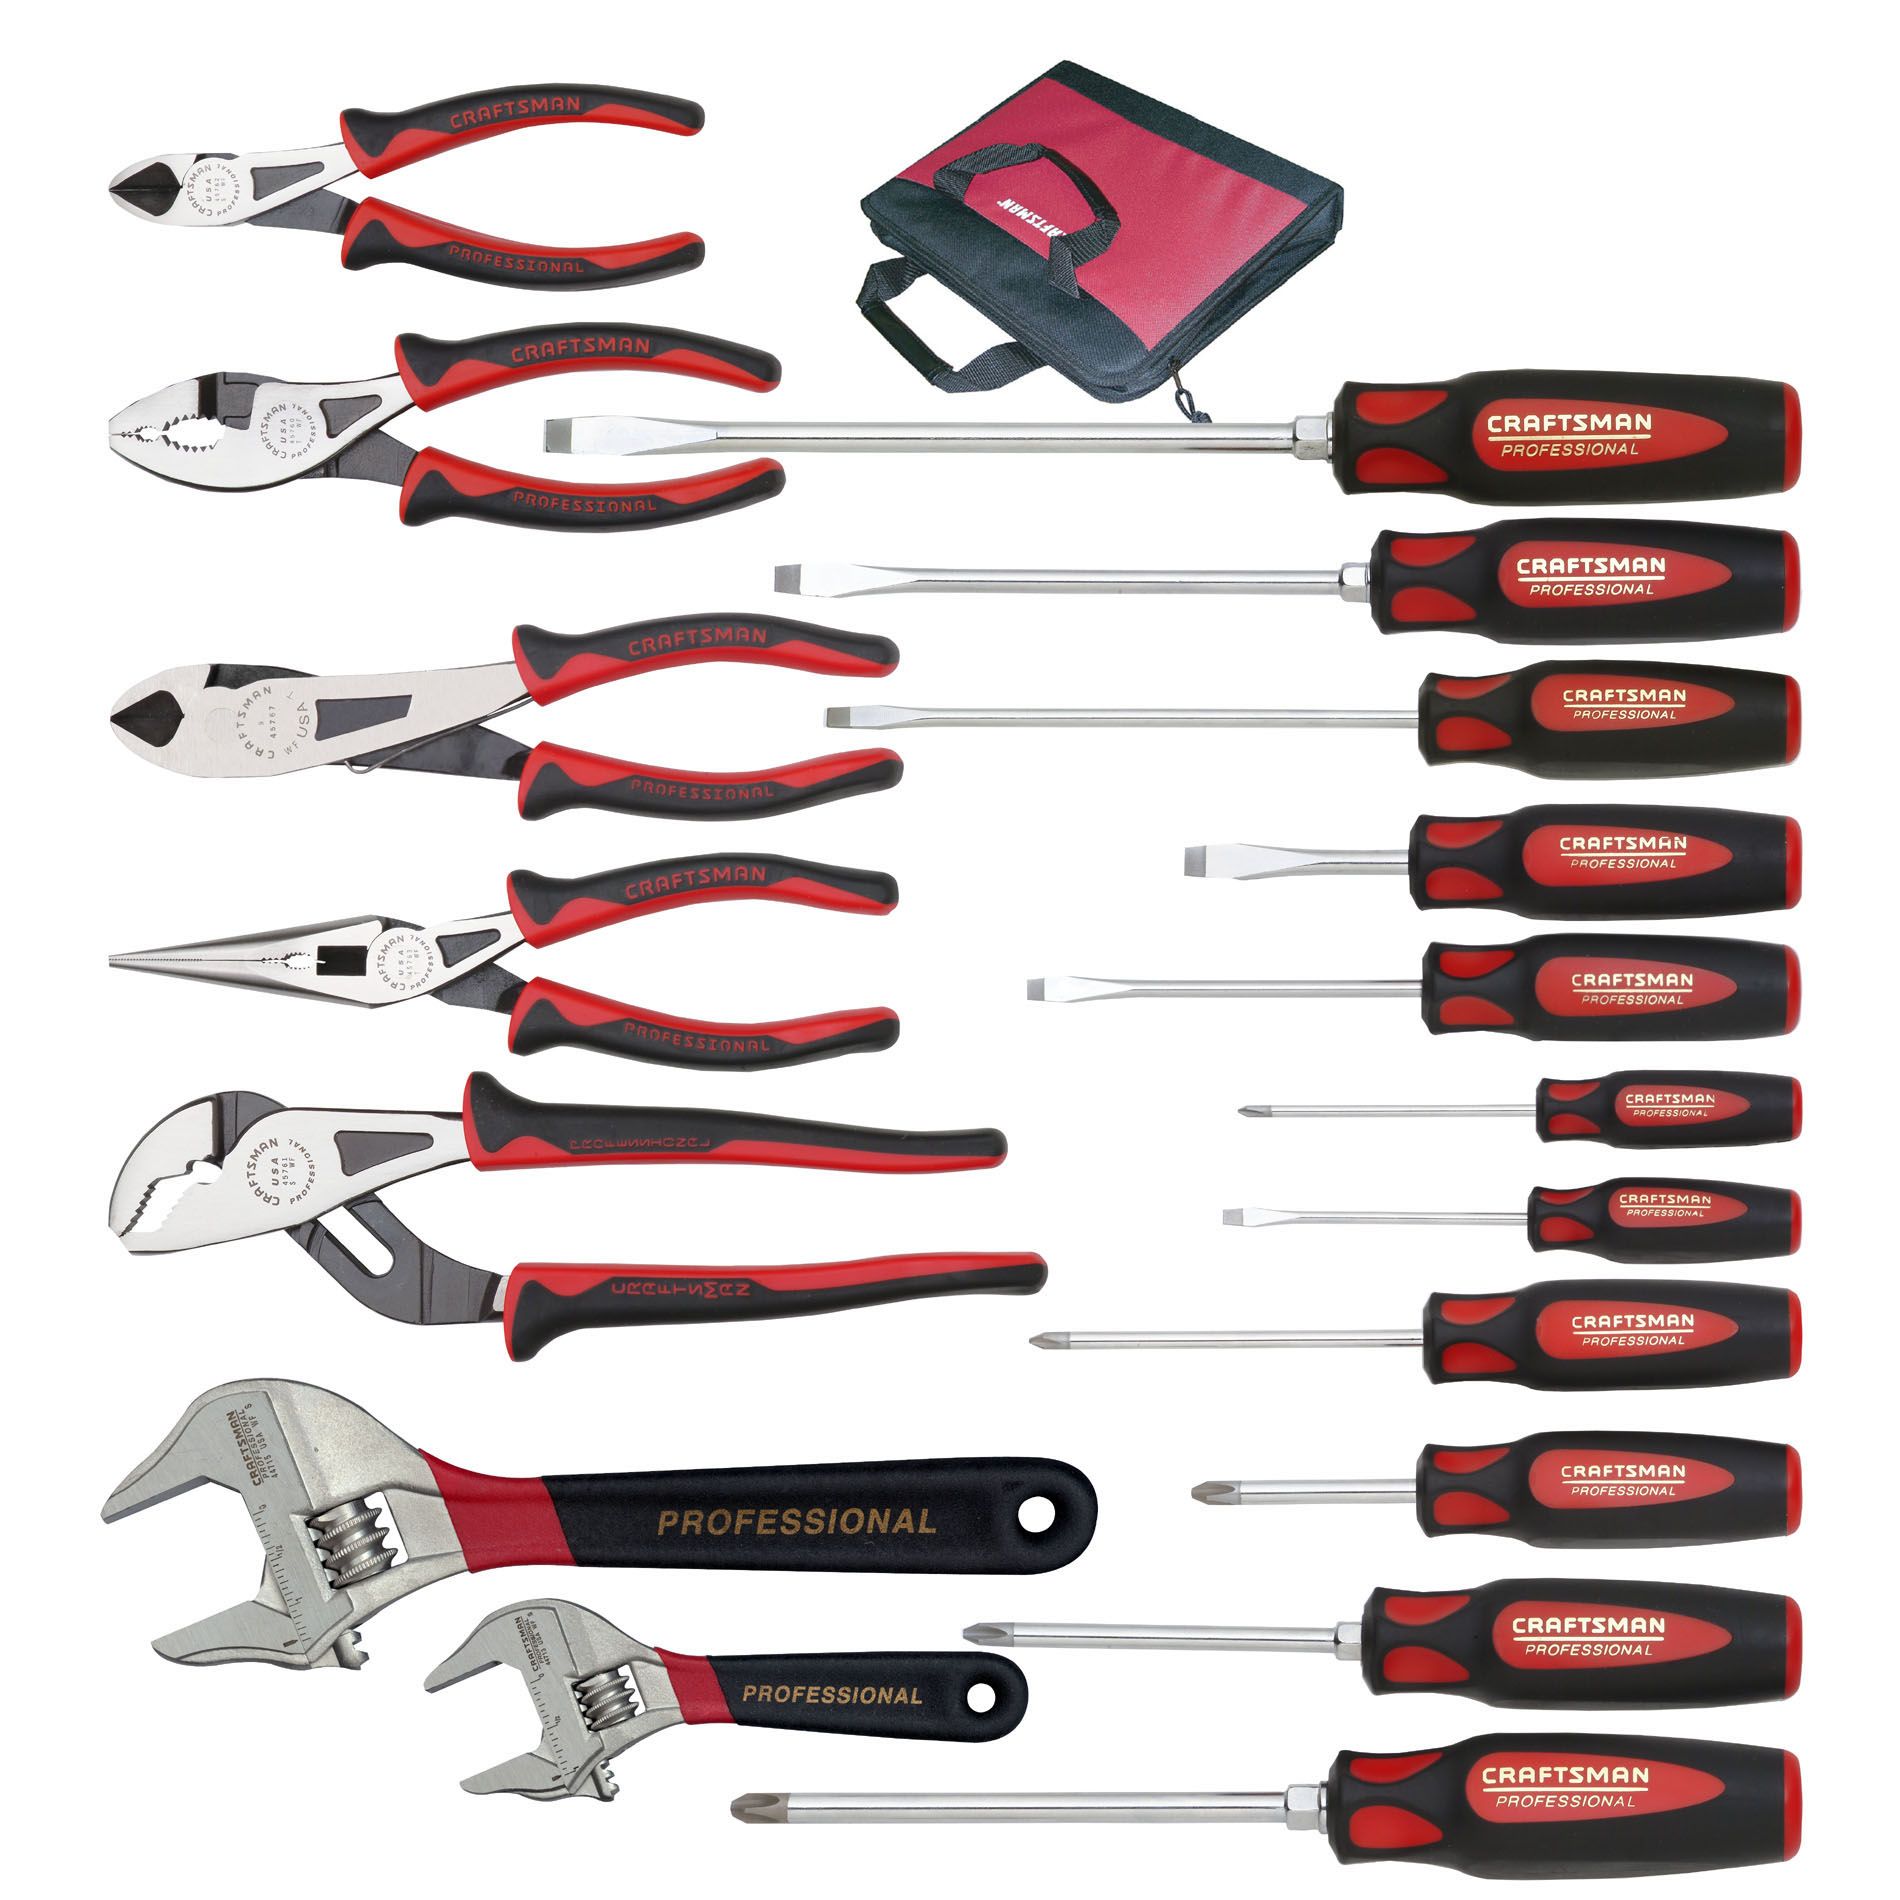 The Ultimate Hand Tools List for Every Workshop缩略图